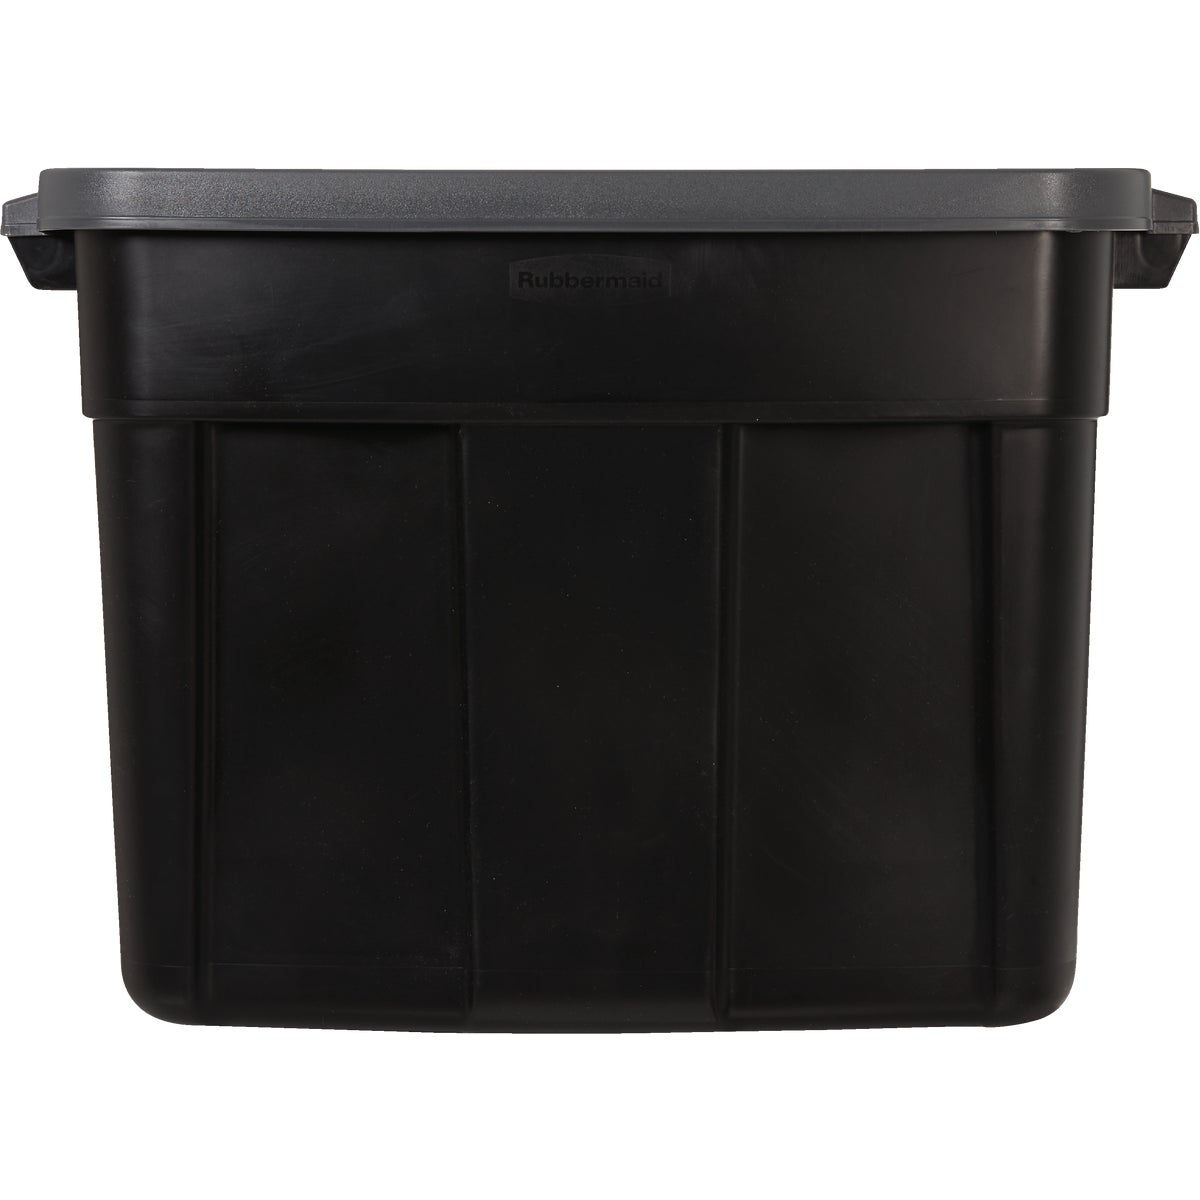 Rubbermaid Roughneck Storage Tote, 18 Gallon - Midwest Technology Products